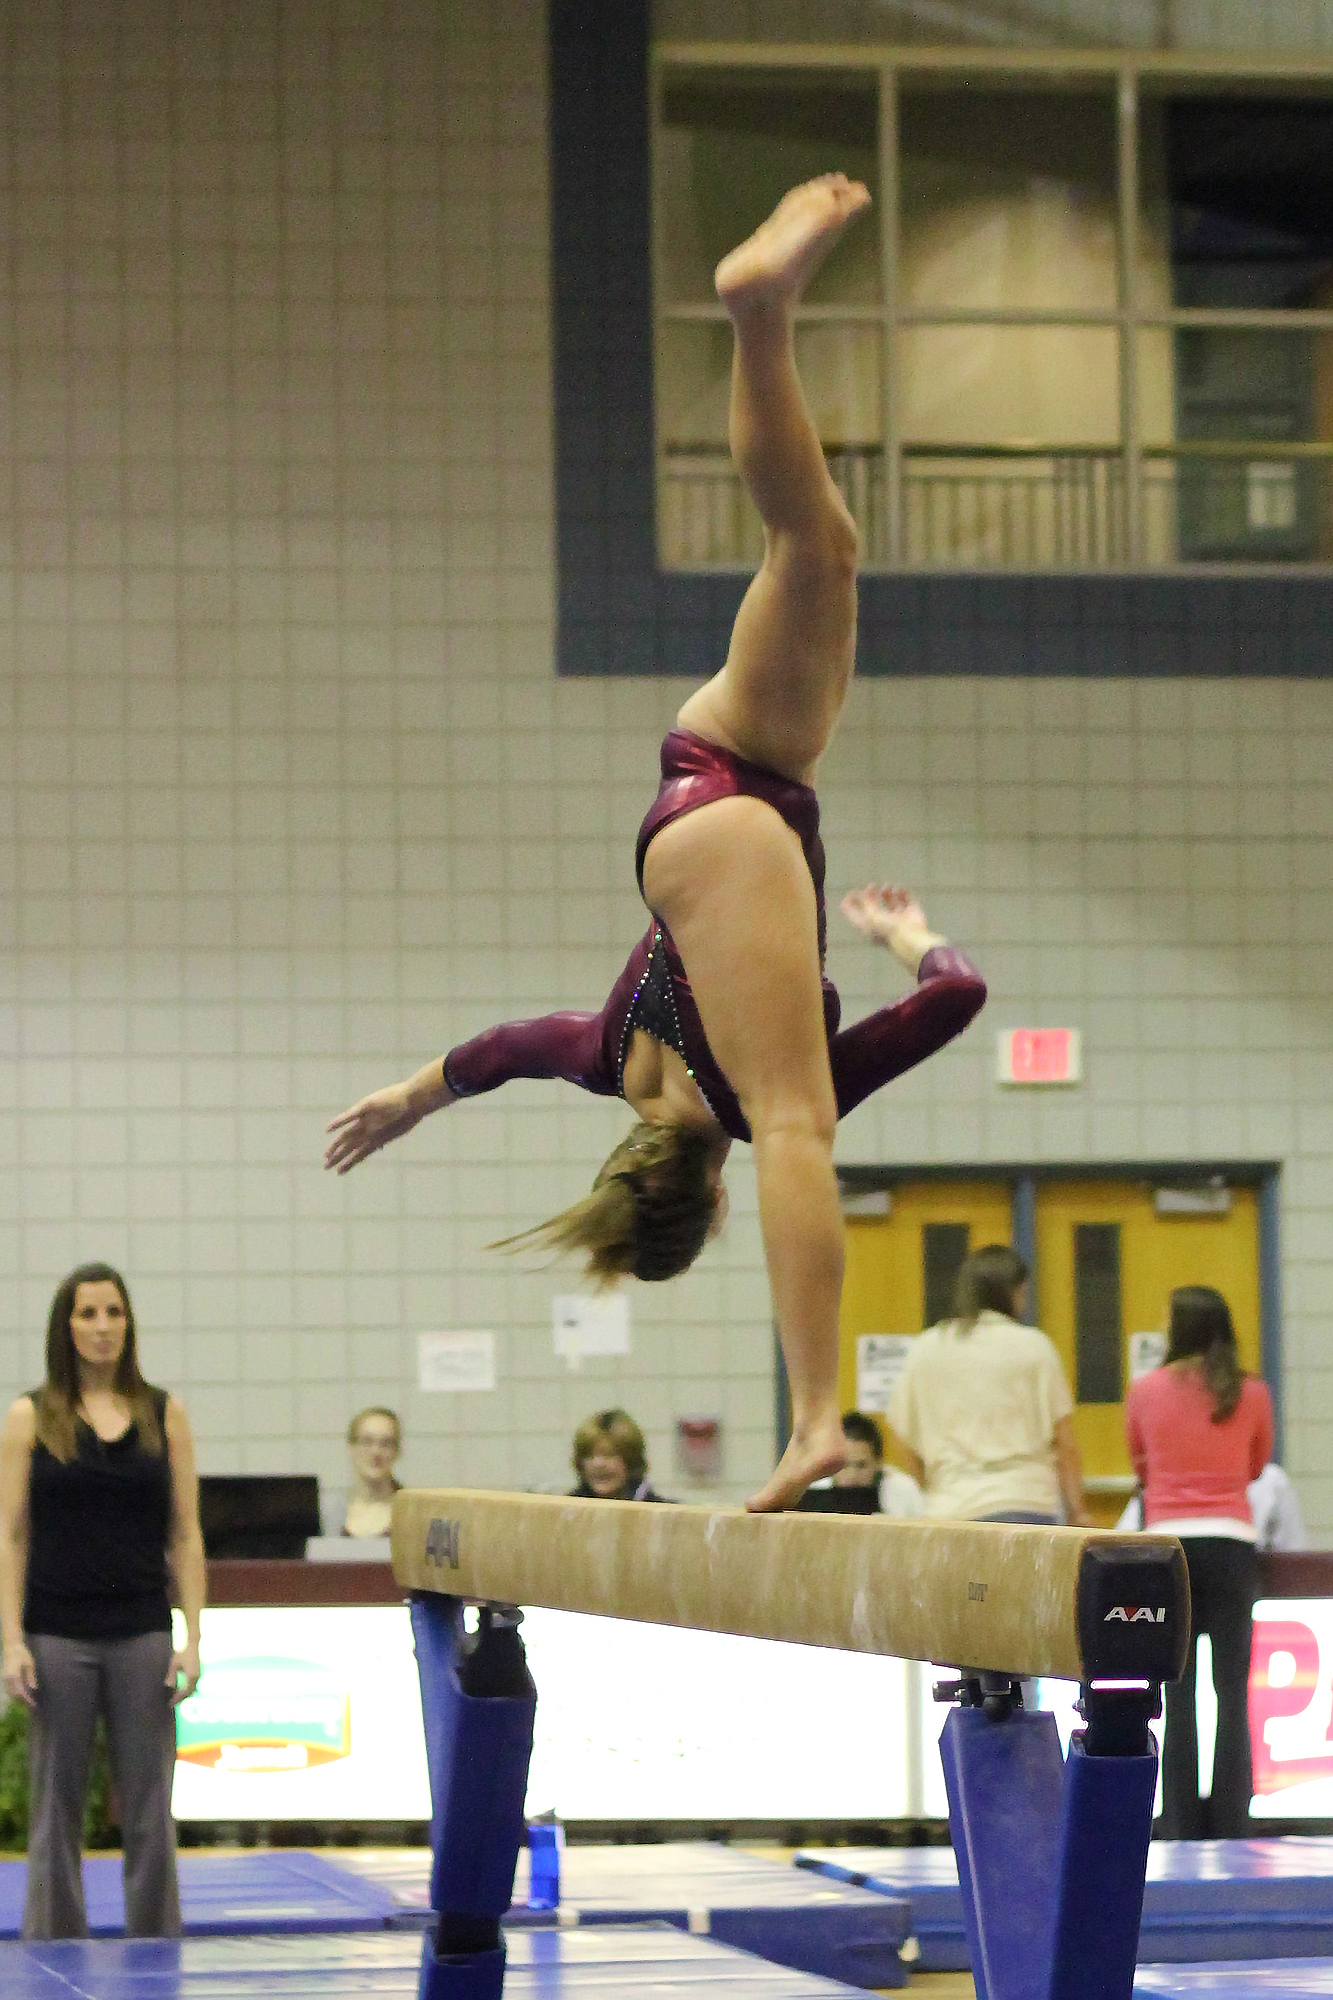 a woman on the beam doing a flip on a gymnastics track